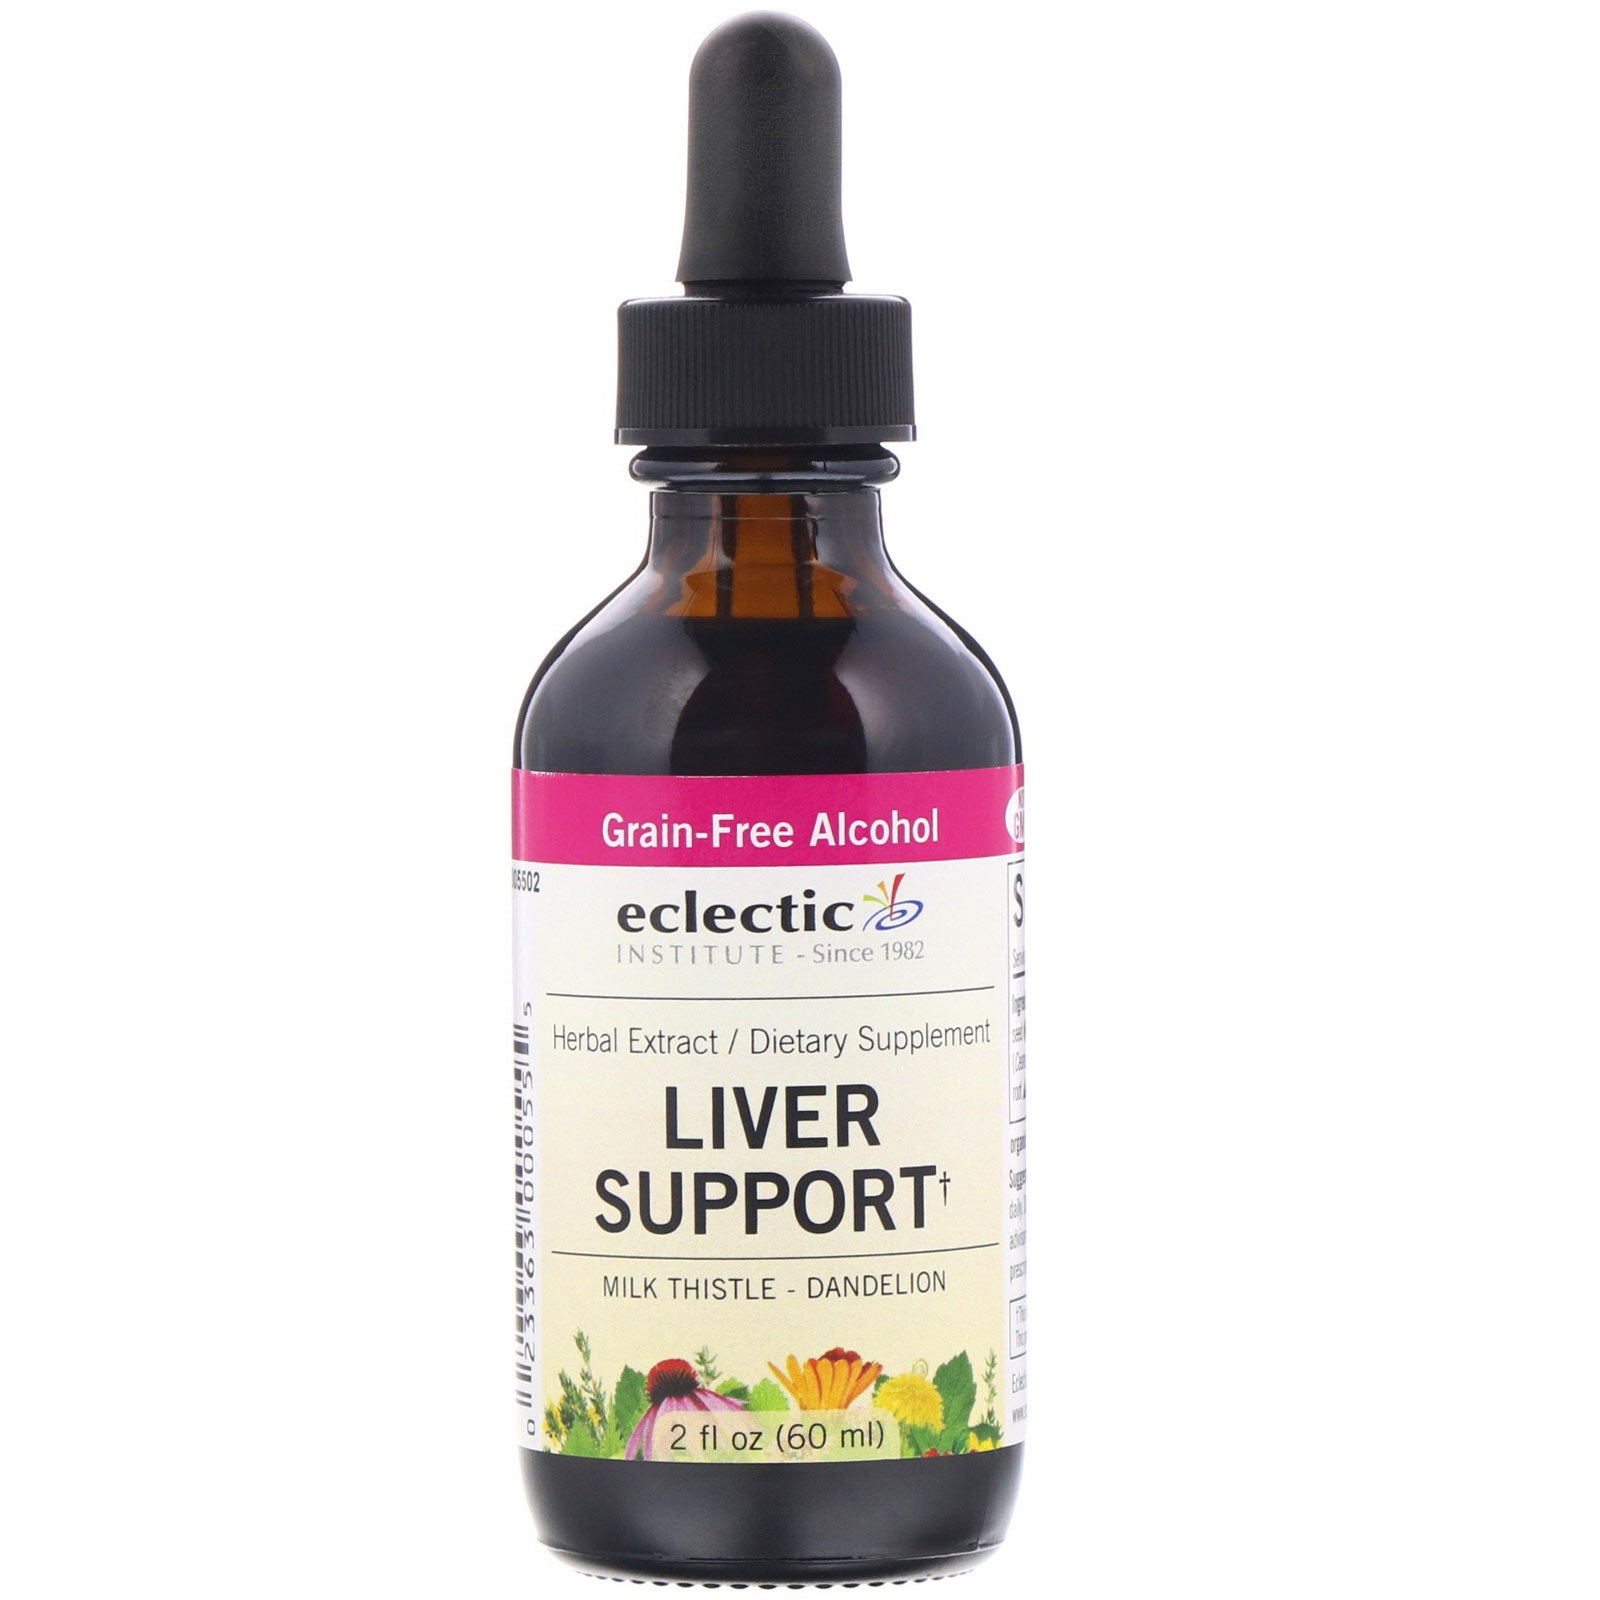 Eclectic Institute, Liver Support, 2 fl oz (60 ml)